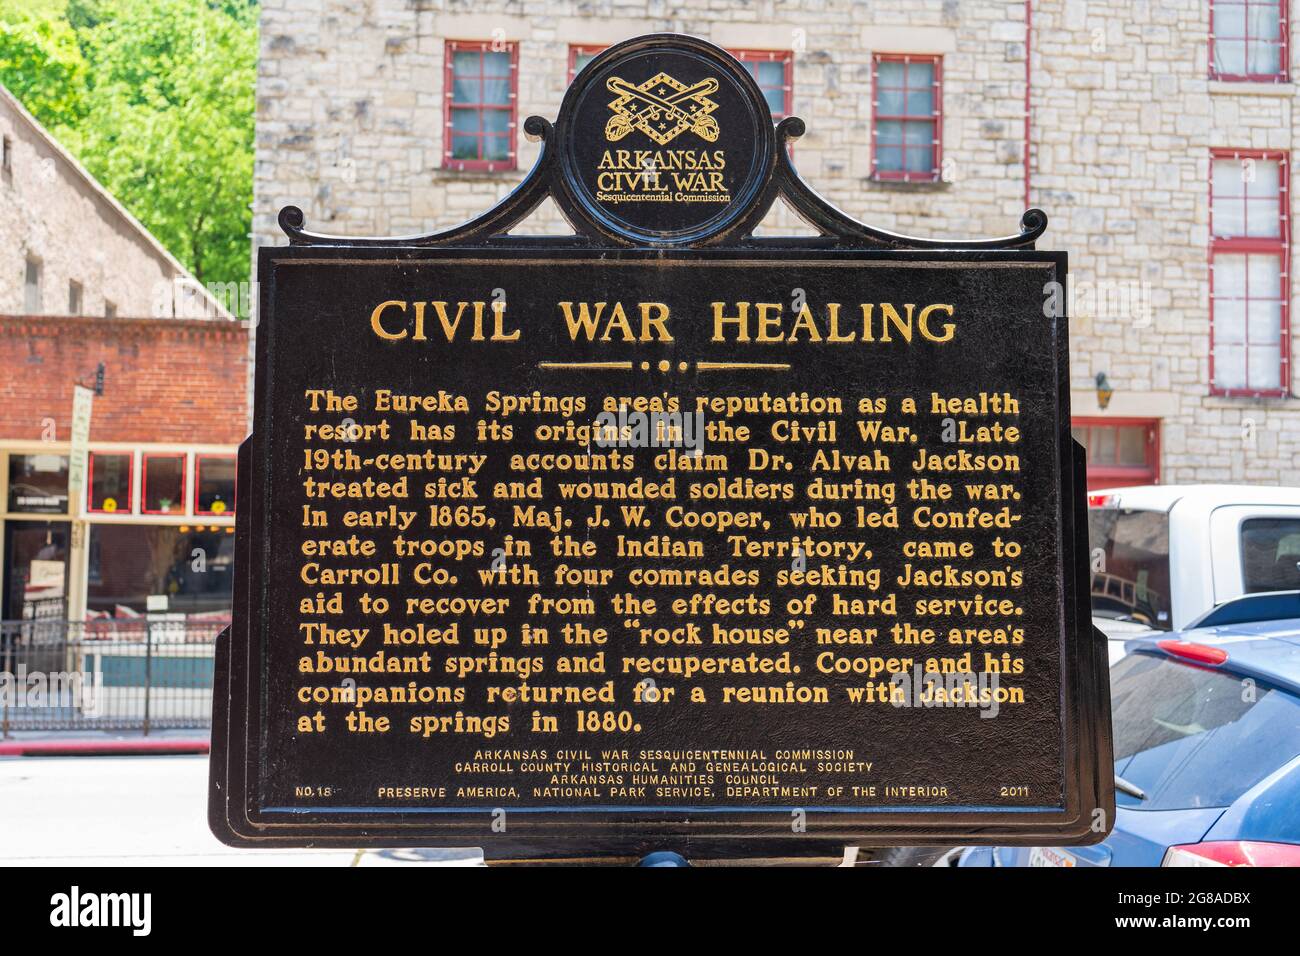 Eureka Springs, AR - June 11, 2021: This sign describes Eureka Springs as a health resort in the late 19th century and its connection to the Civil War Stock Photo